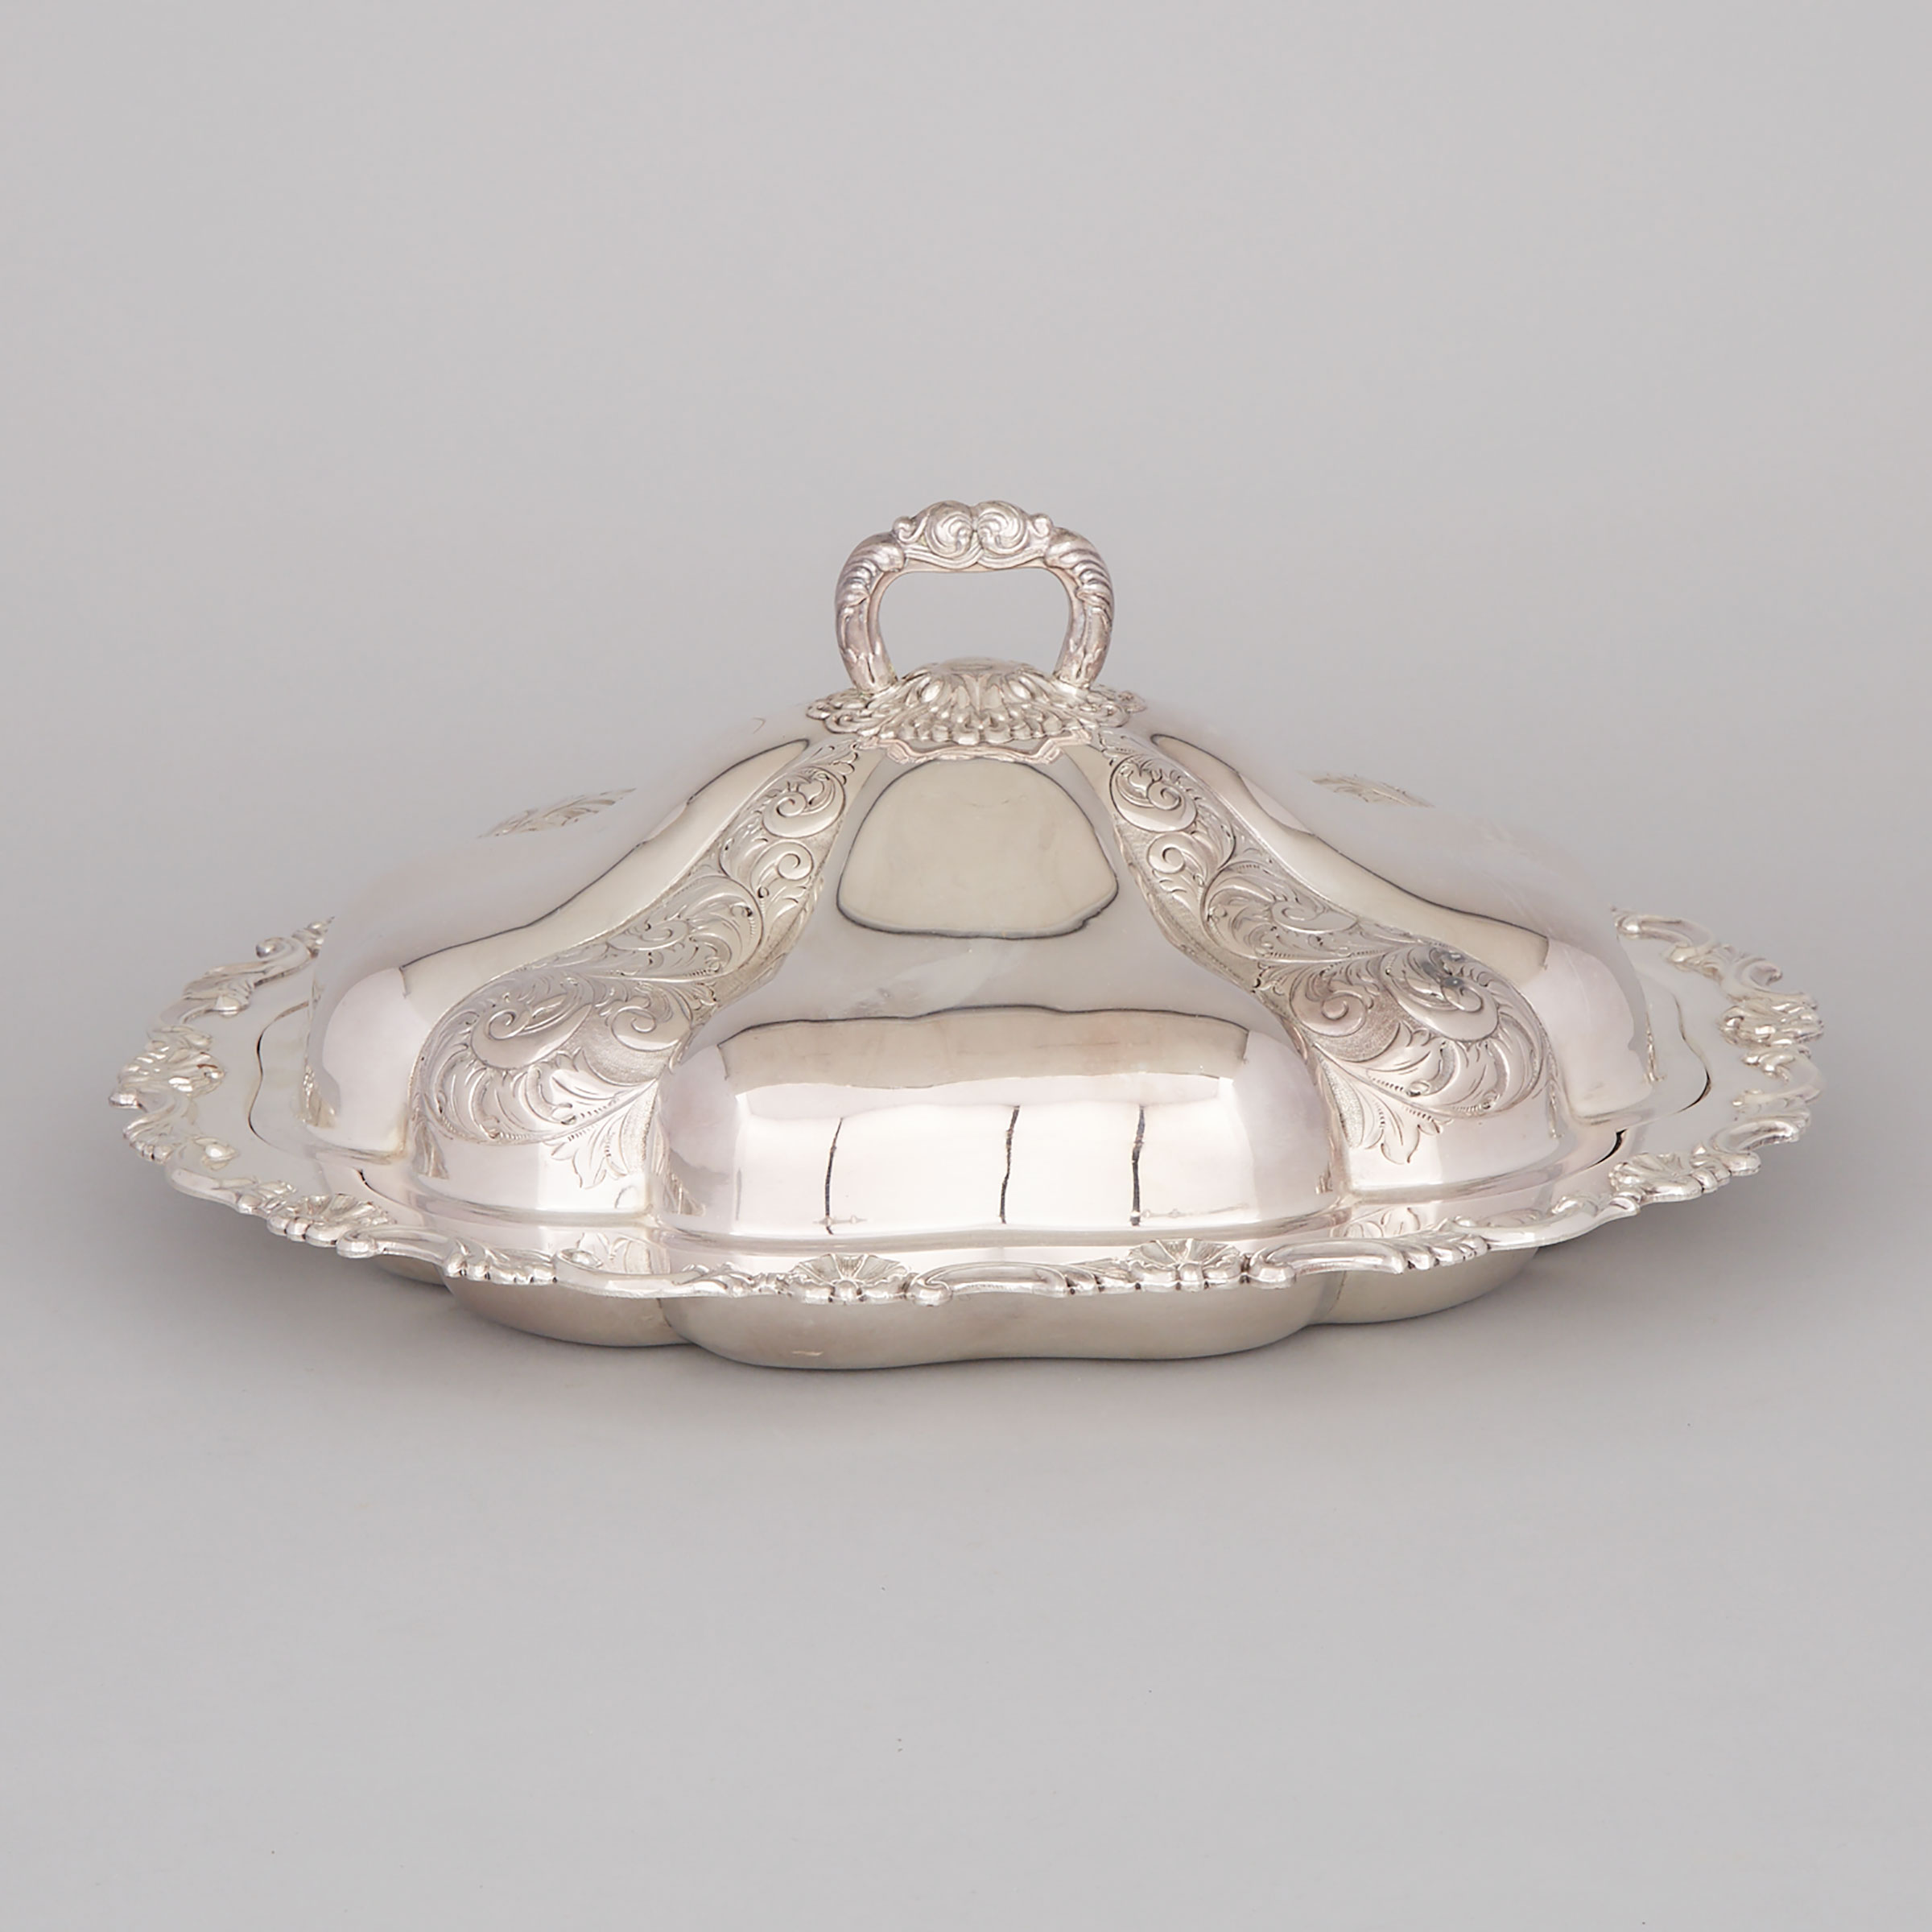 English Silver Plated Large Covered Serving Dish, 20th century